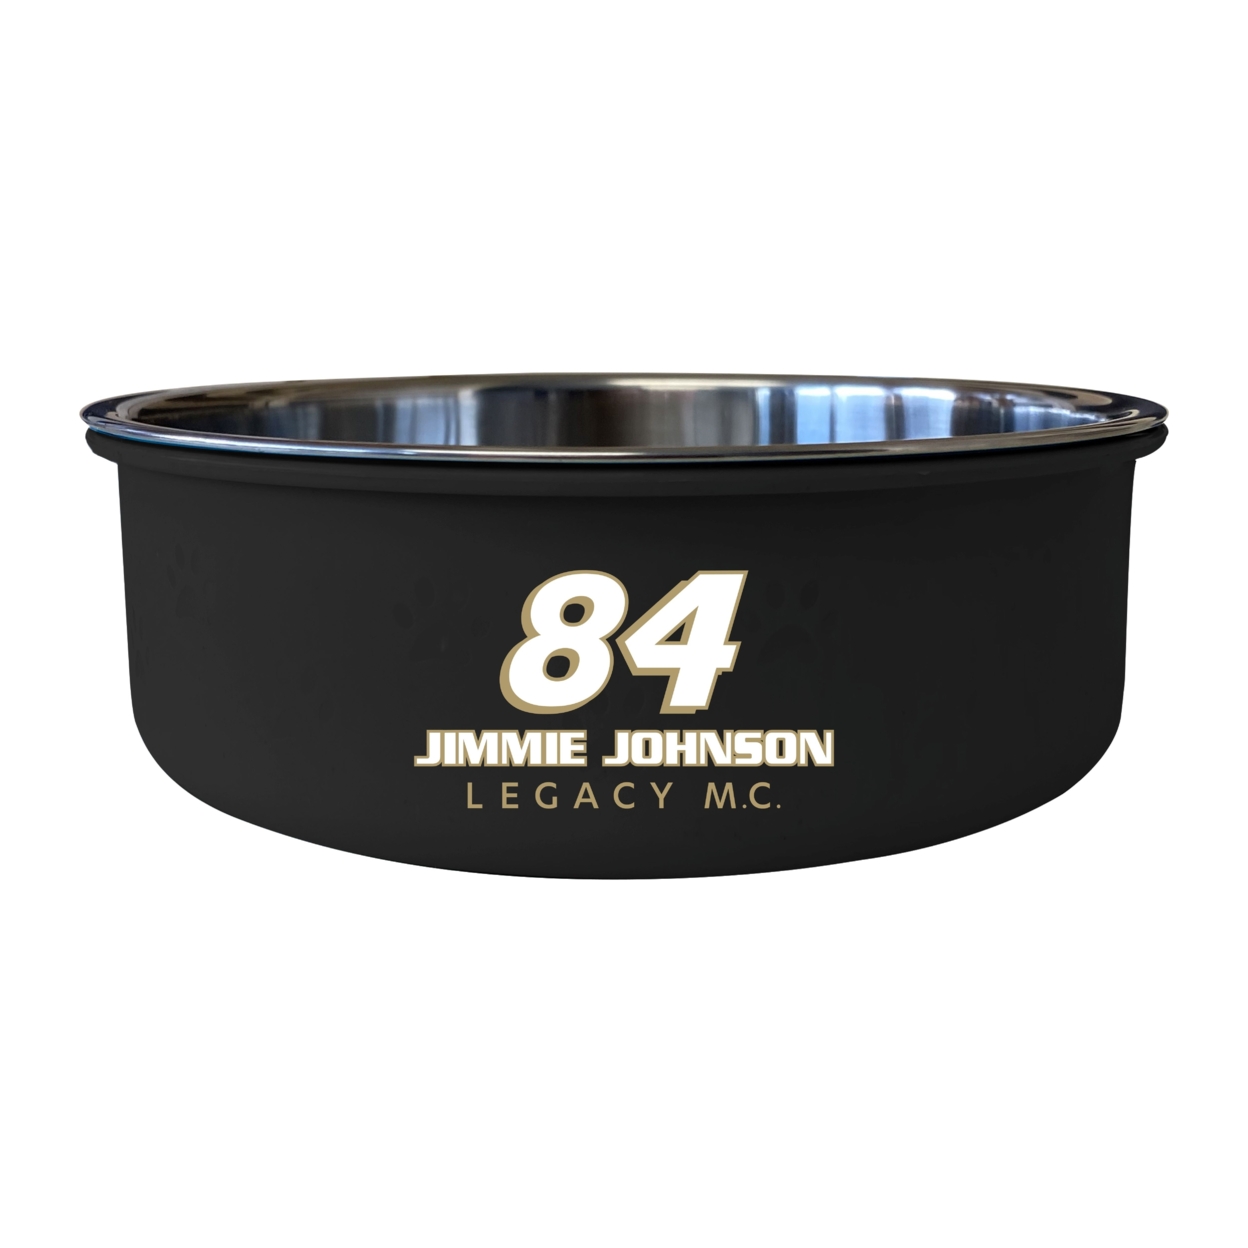 #84 Jimmie Johnson Officially Licensed 5x2.25 Pet Bowl